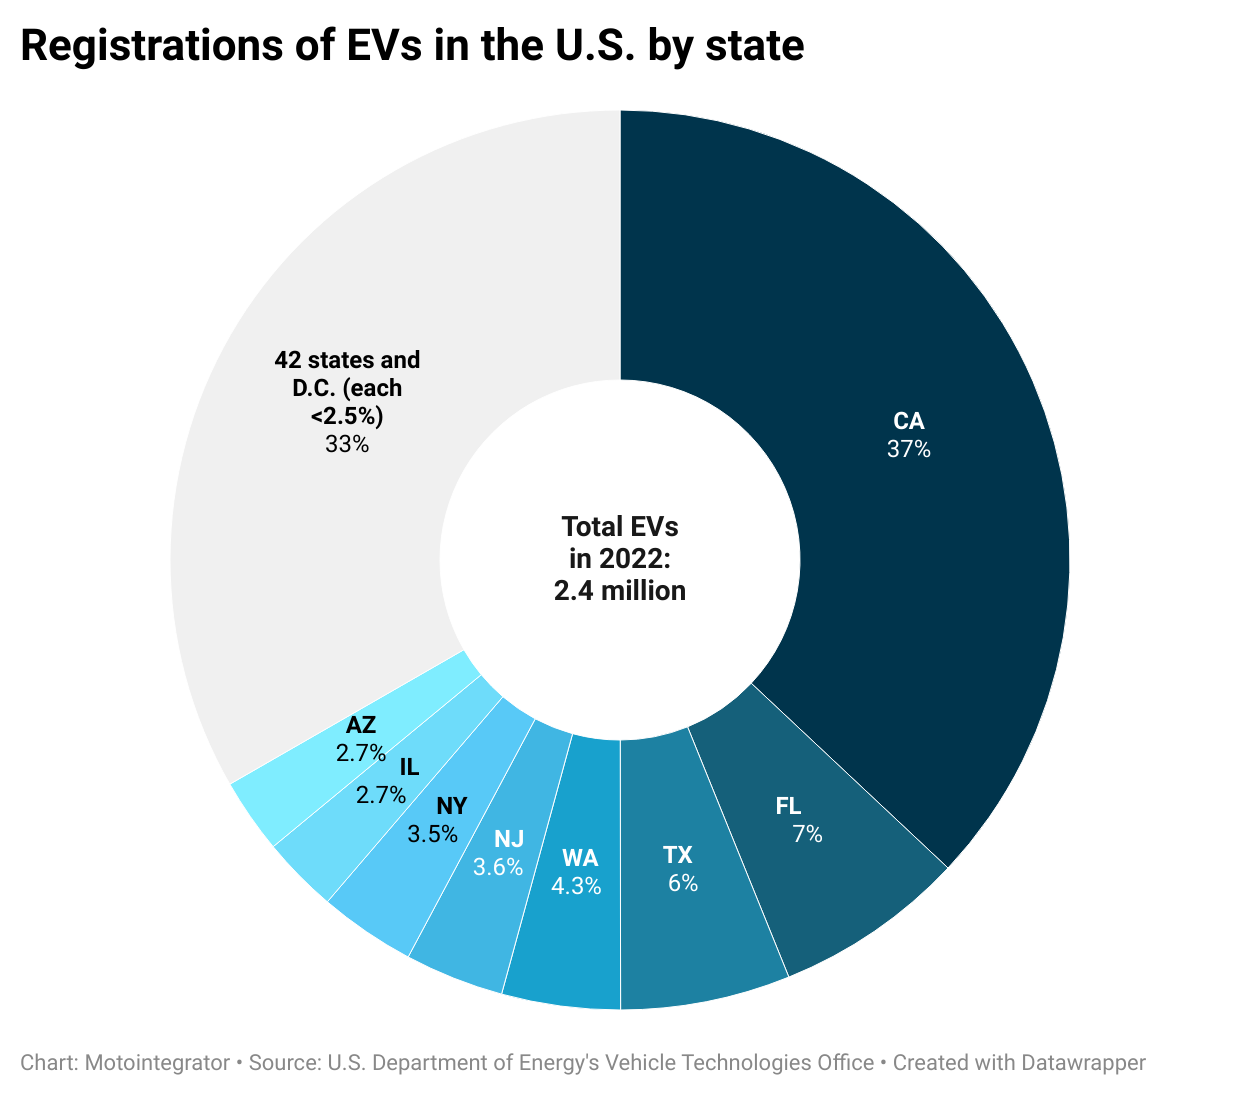 Pie chart showing registrations of EVs.